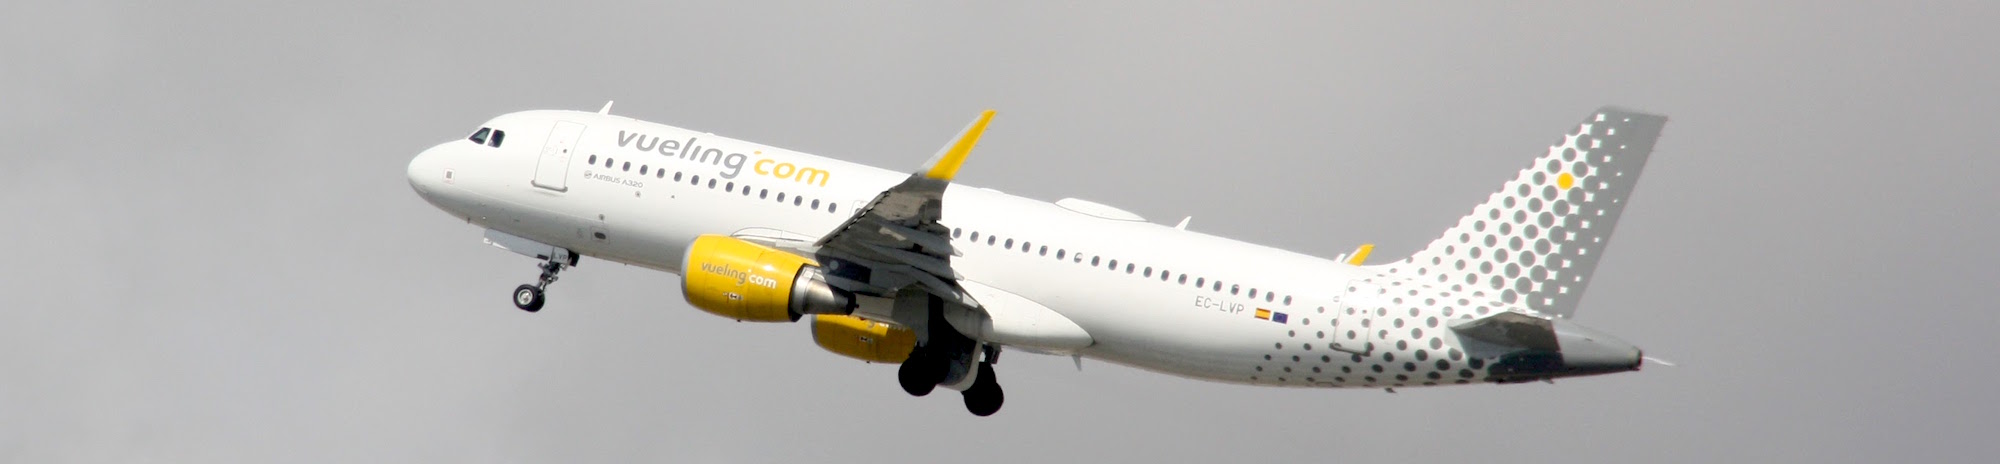 Best time to book flights for London (LGW) to Barcelona (BCN) flights with Vueling at AirHint